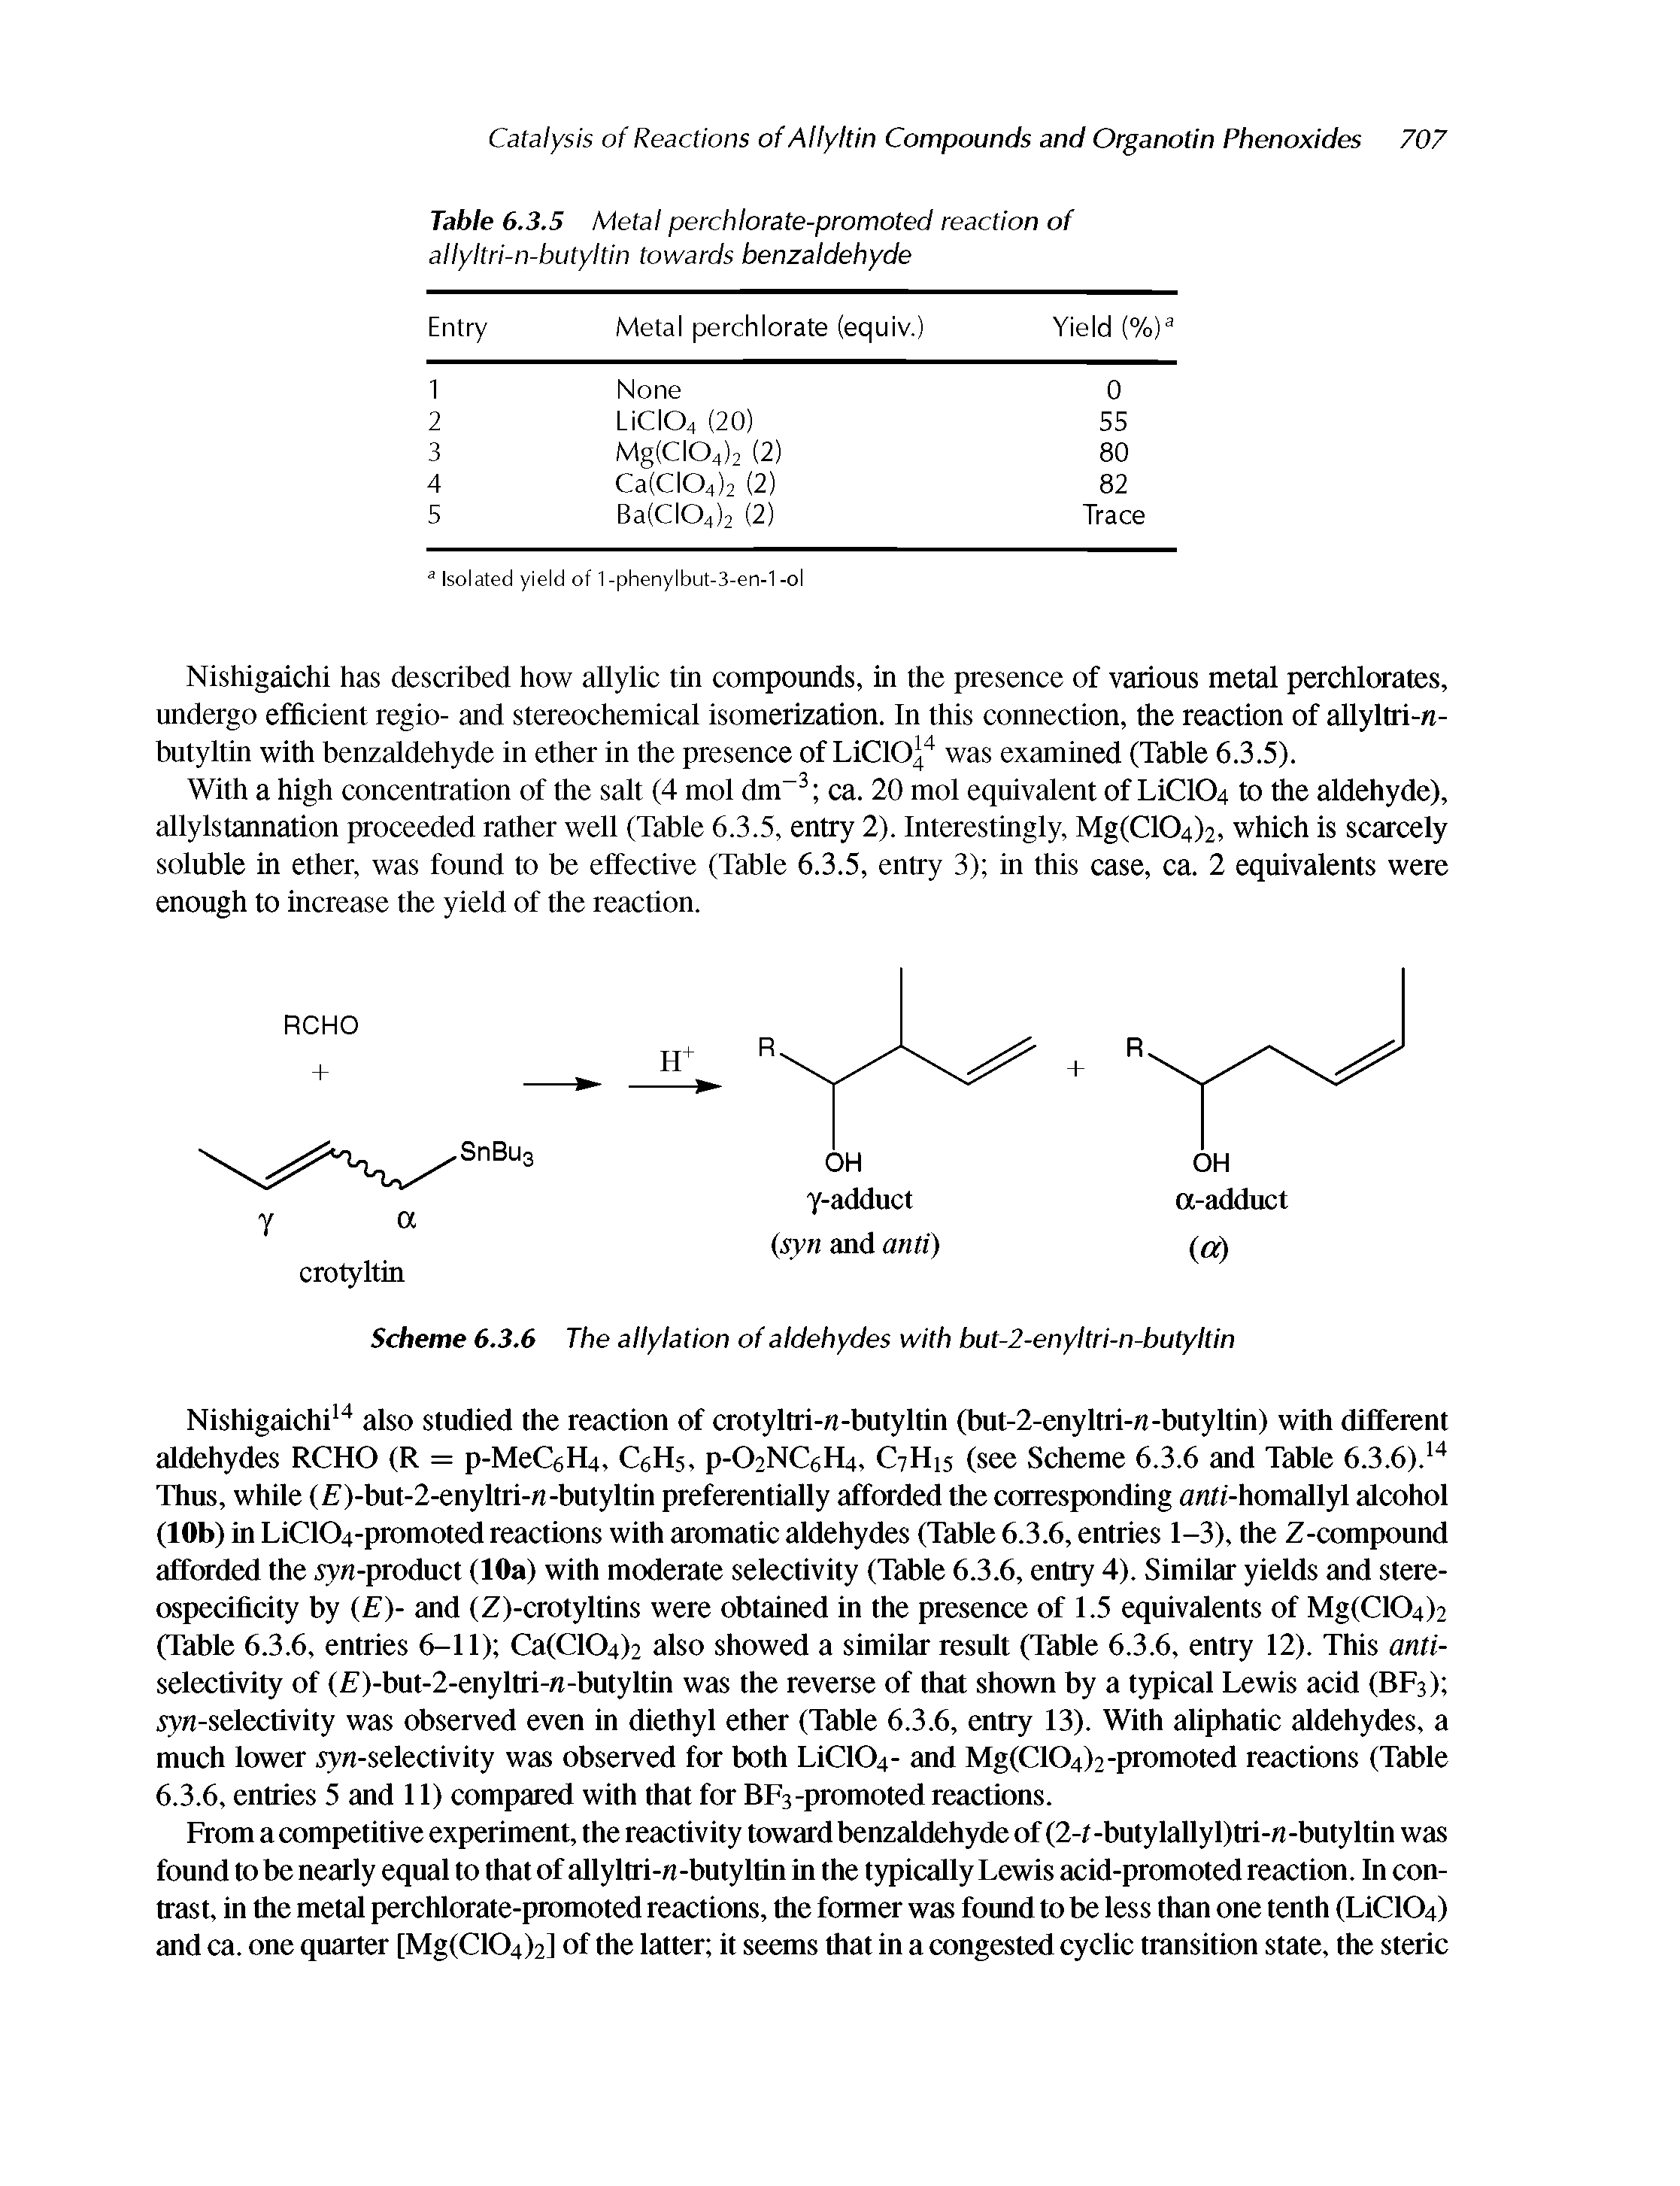 Table 6.3.5 Metal perchlorate-promoted reaction of allyltri-n-butyltin towards benzaldehyde...